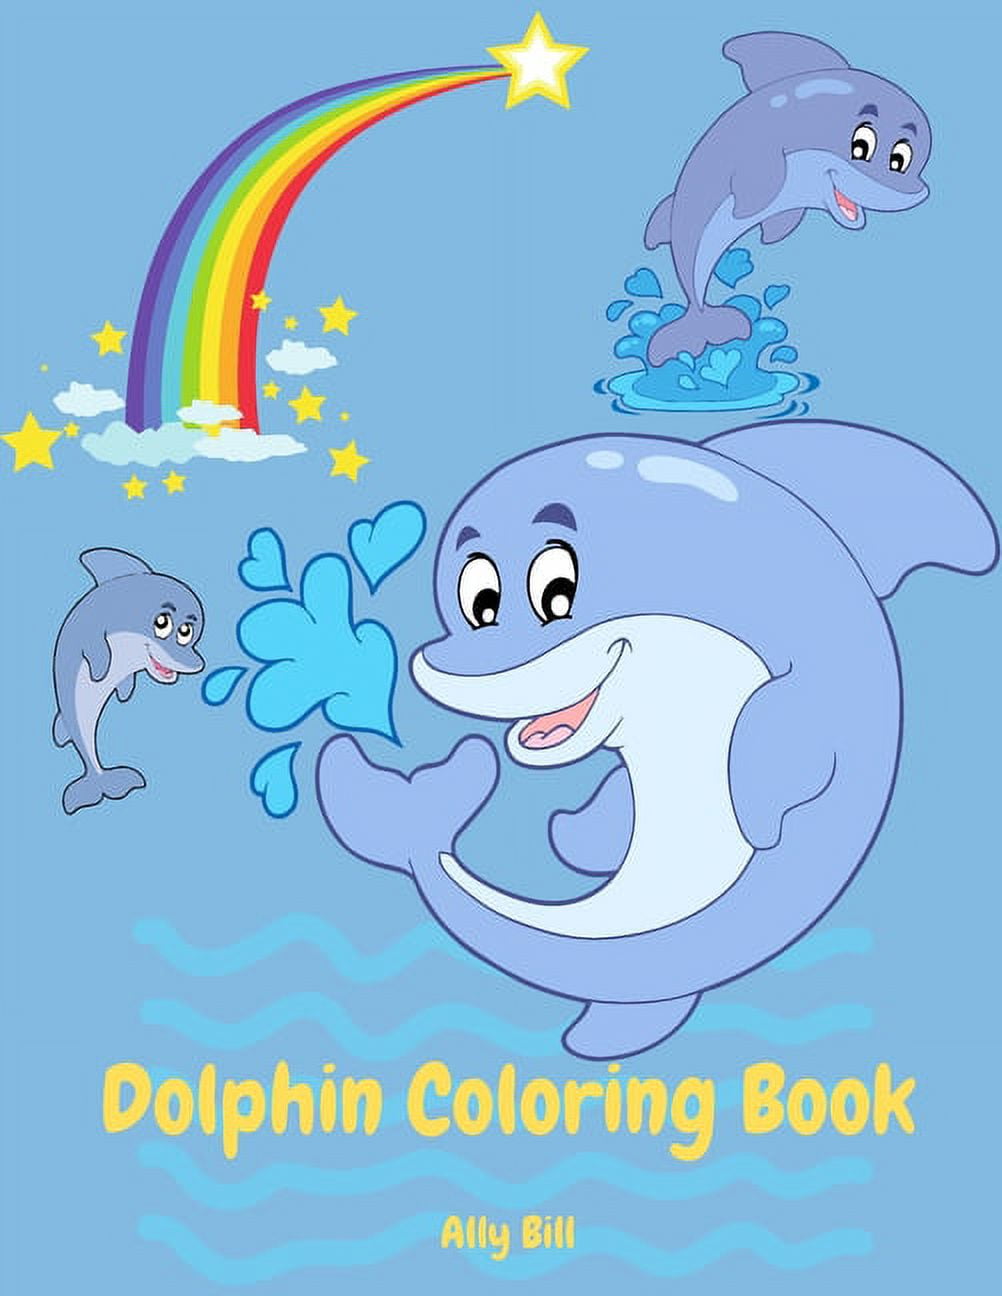 Dolphin Coloring Books For Kids Ages 8-12: Features Amazing Ocean Animals  To Color In, Activity Book For Young Boys & Girls (Paperback)